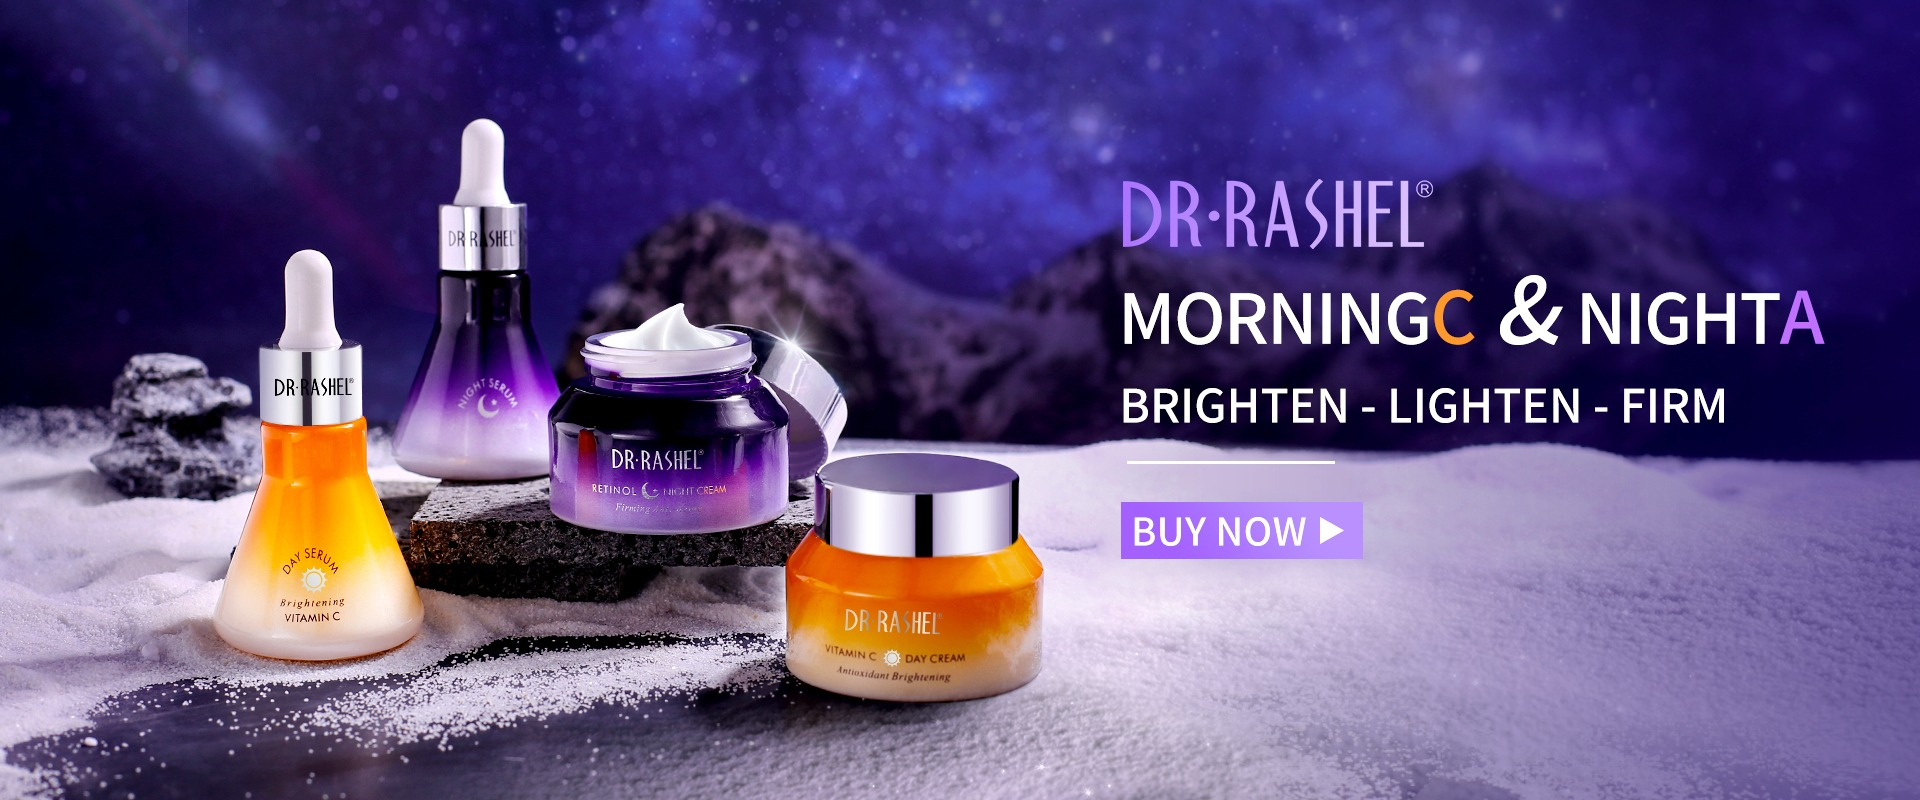 dr rashel day and night pack